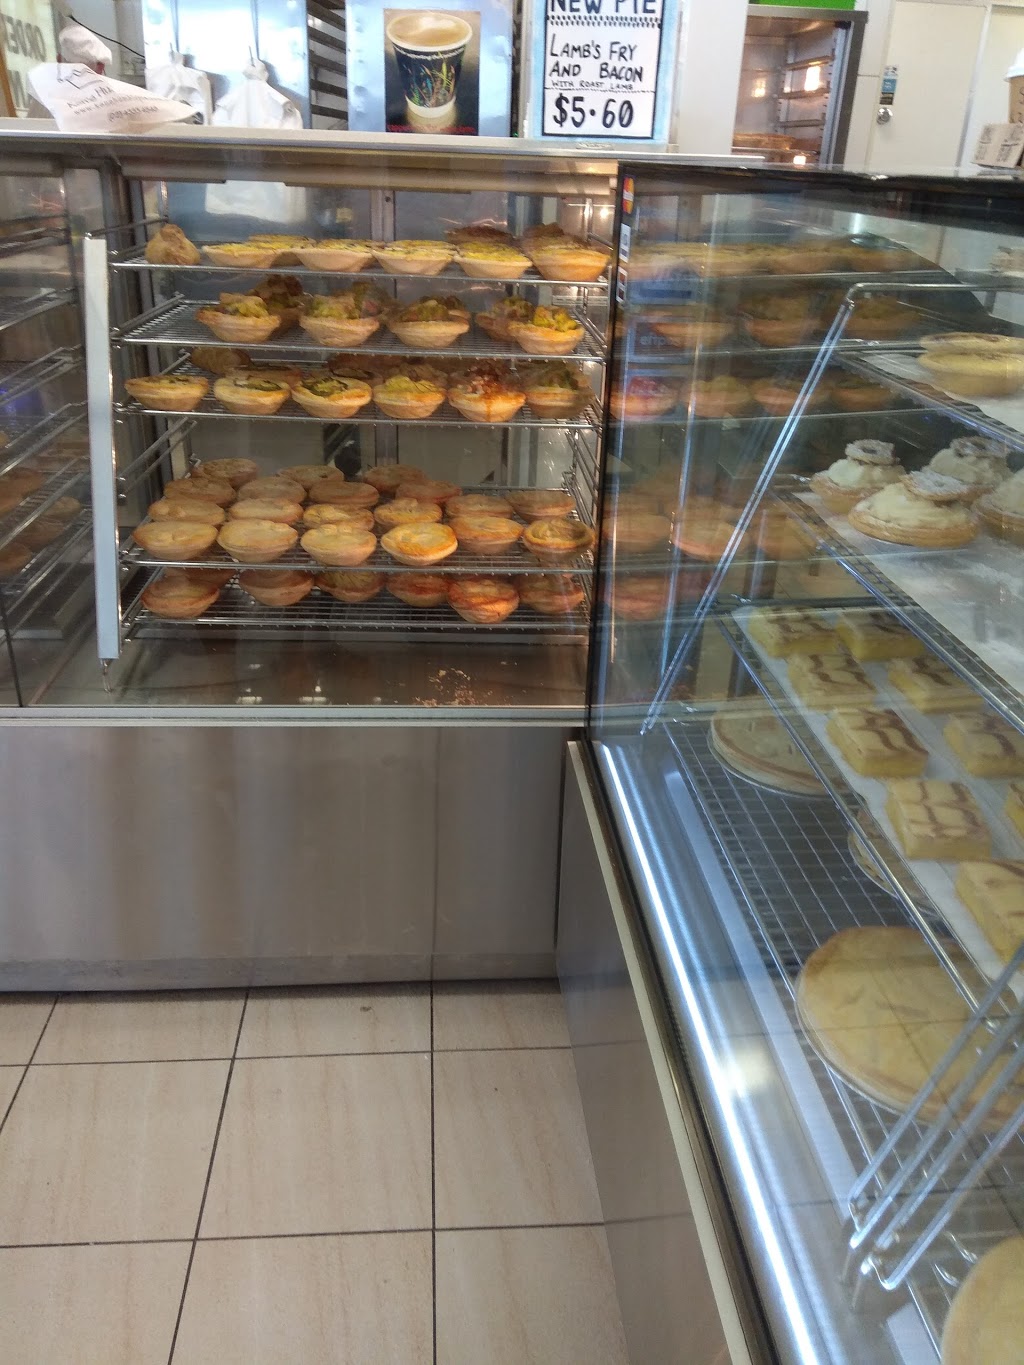 Kens Humble Pie Shop | bakery | 32 Coral St, The Entrance NSW 2261, Australia | 0243334548 OR +61 2 4333 4548